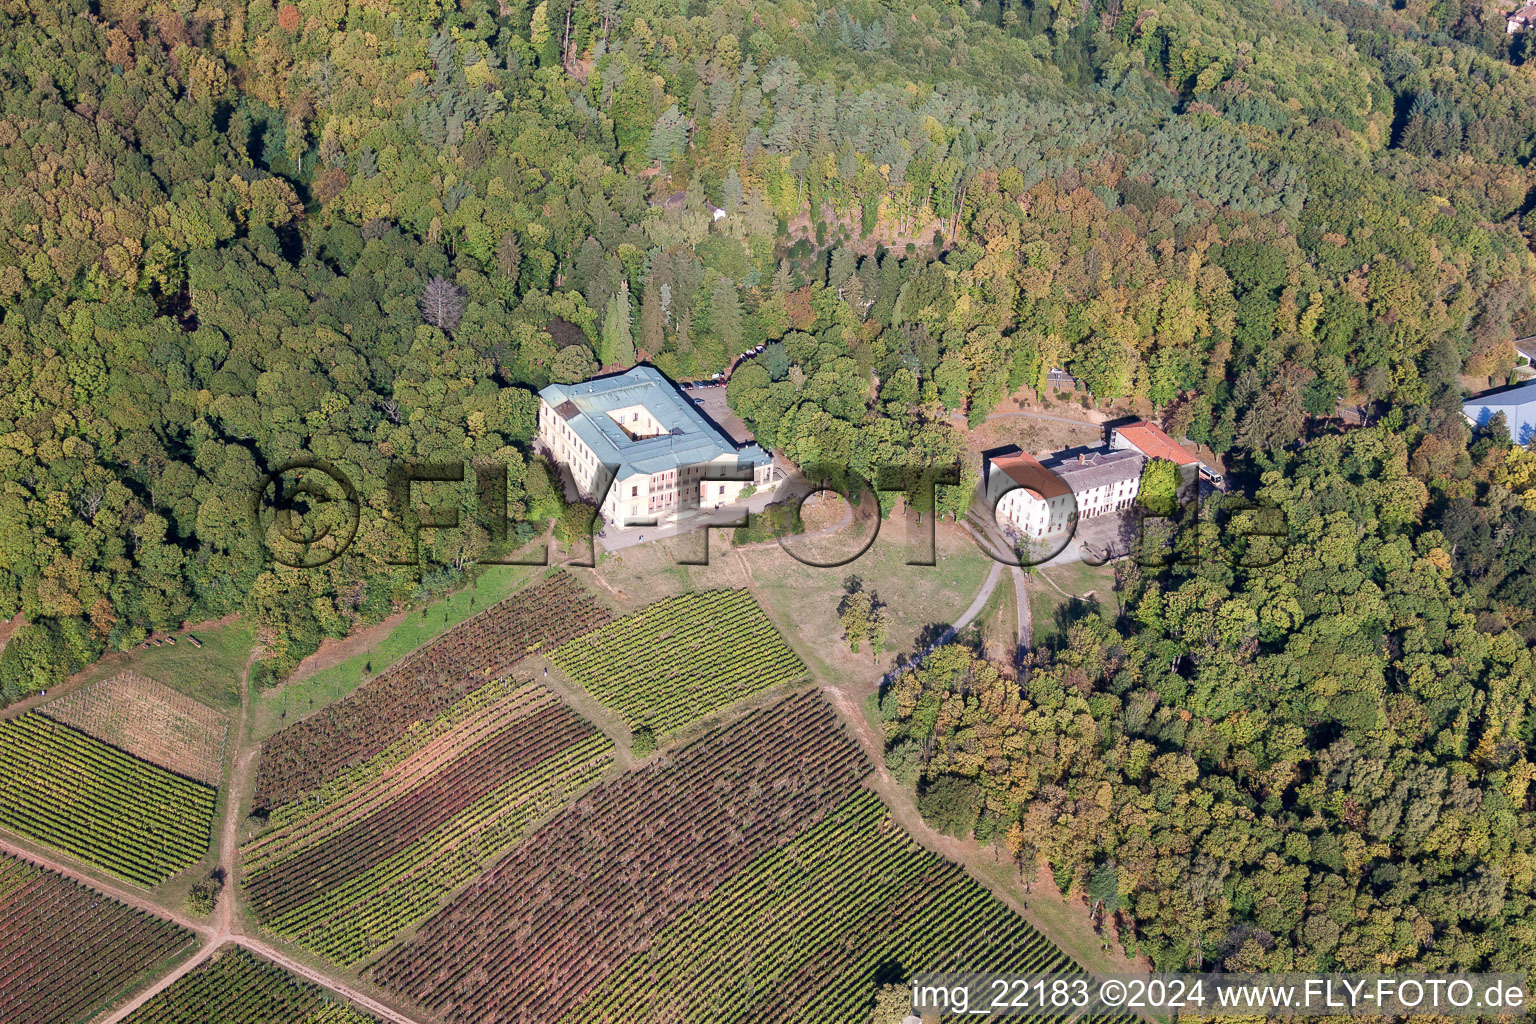 Aerial photograpy of Palace Villa Ludwigshoehe in Edenkoben in the state Rhineland-Palatinate, Germany